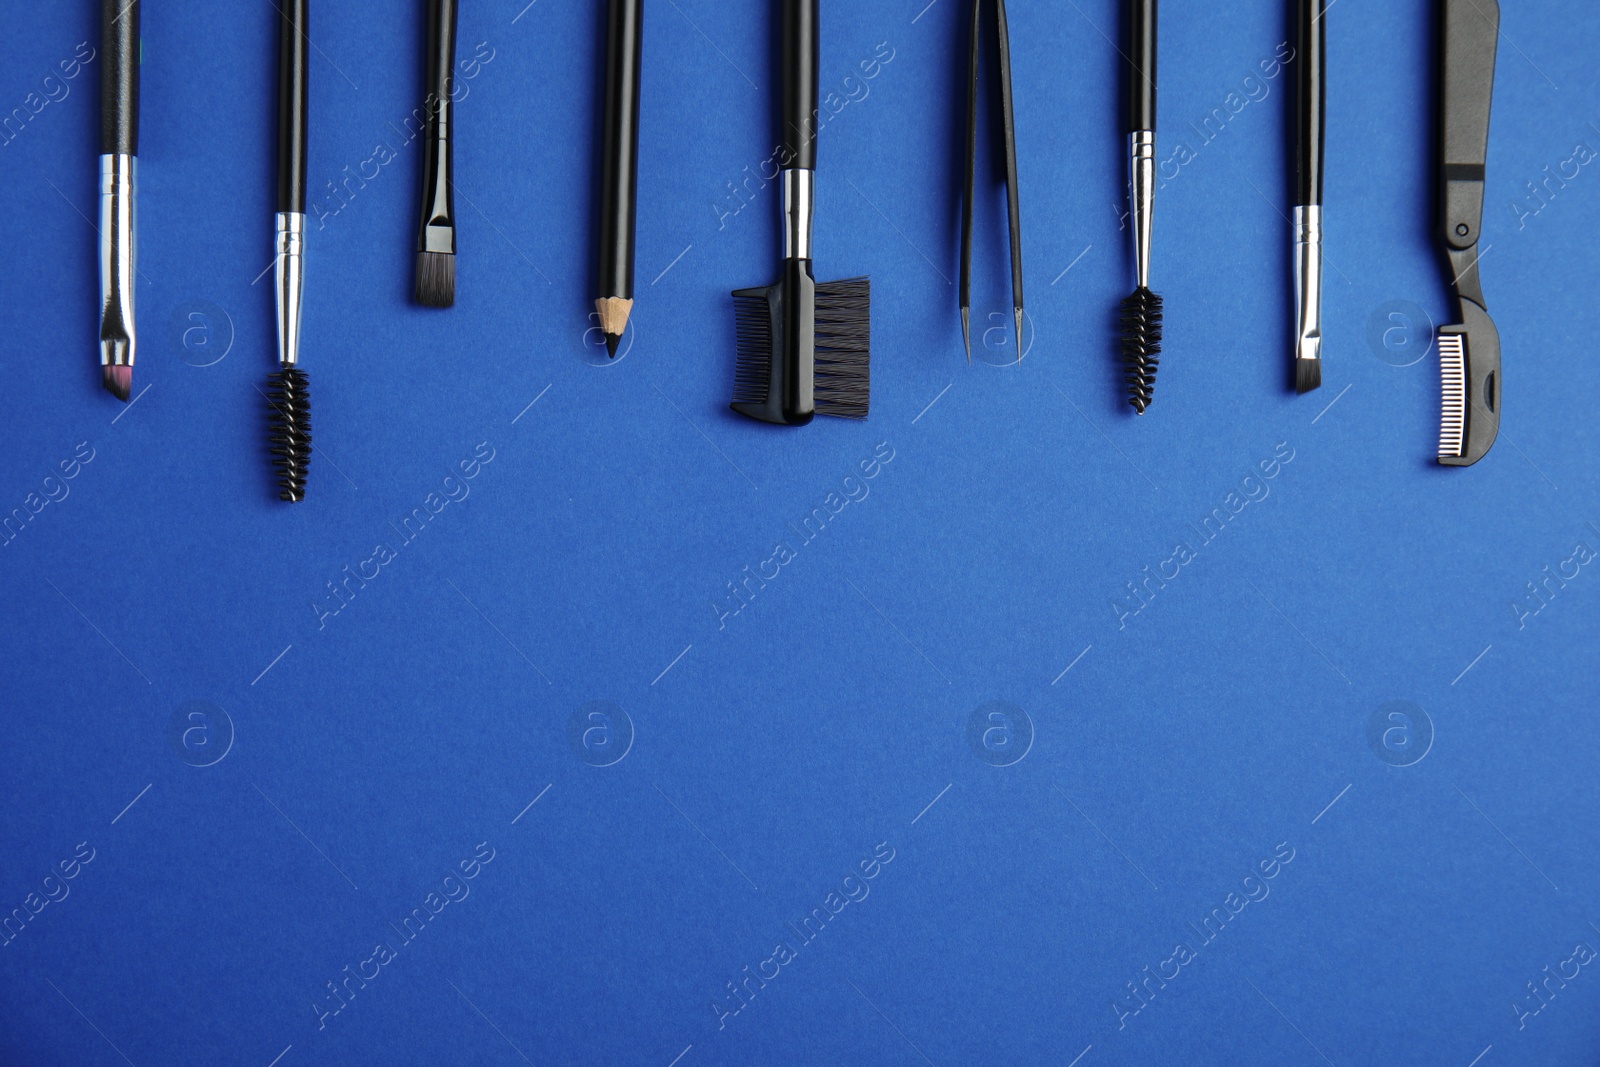 Photo of Set of professional eyebrow tools on blue background, flat lay. Space for text